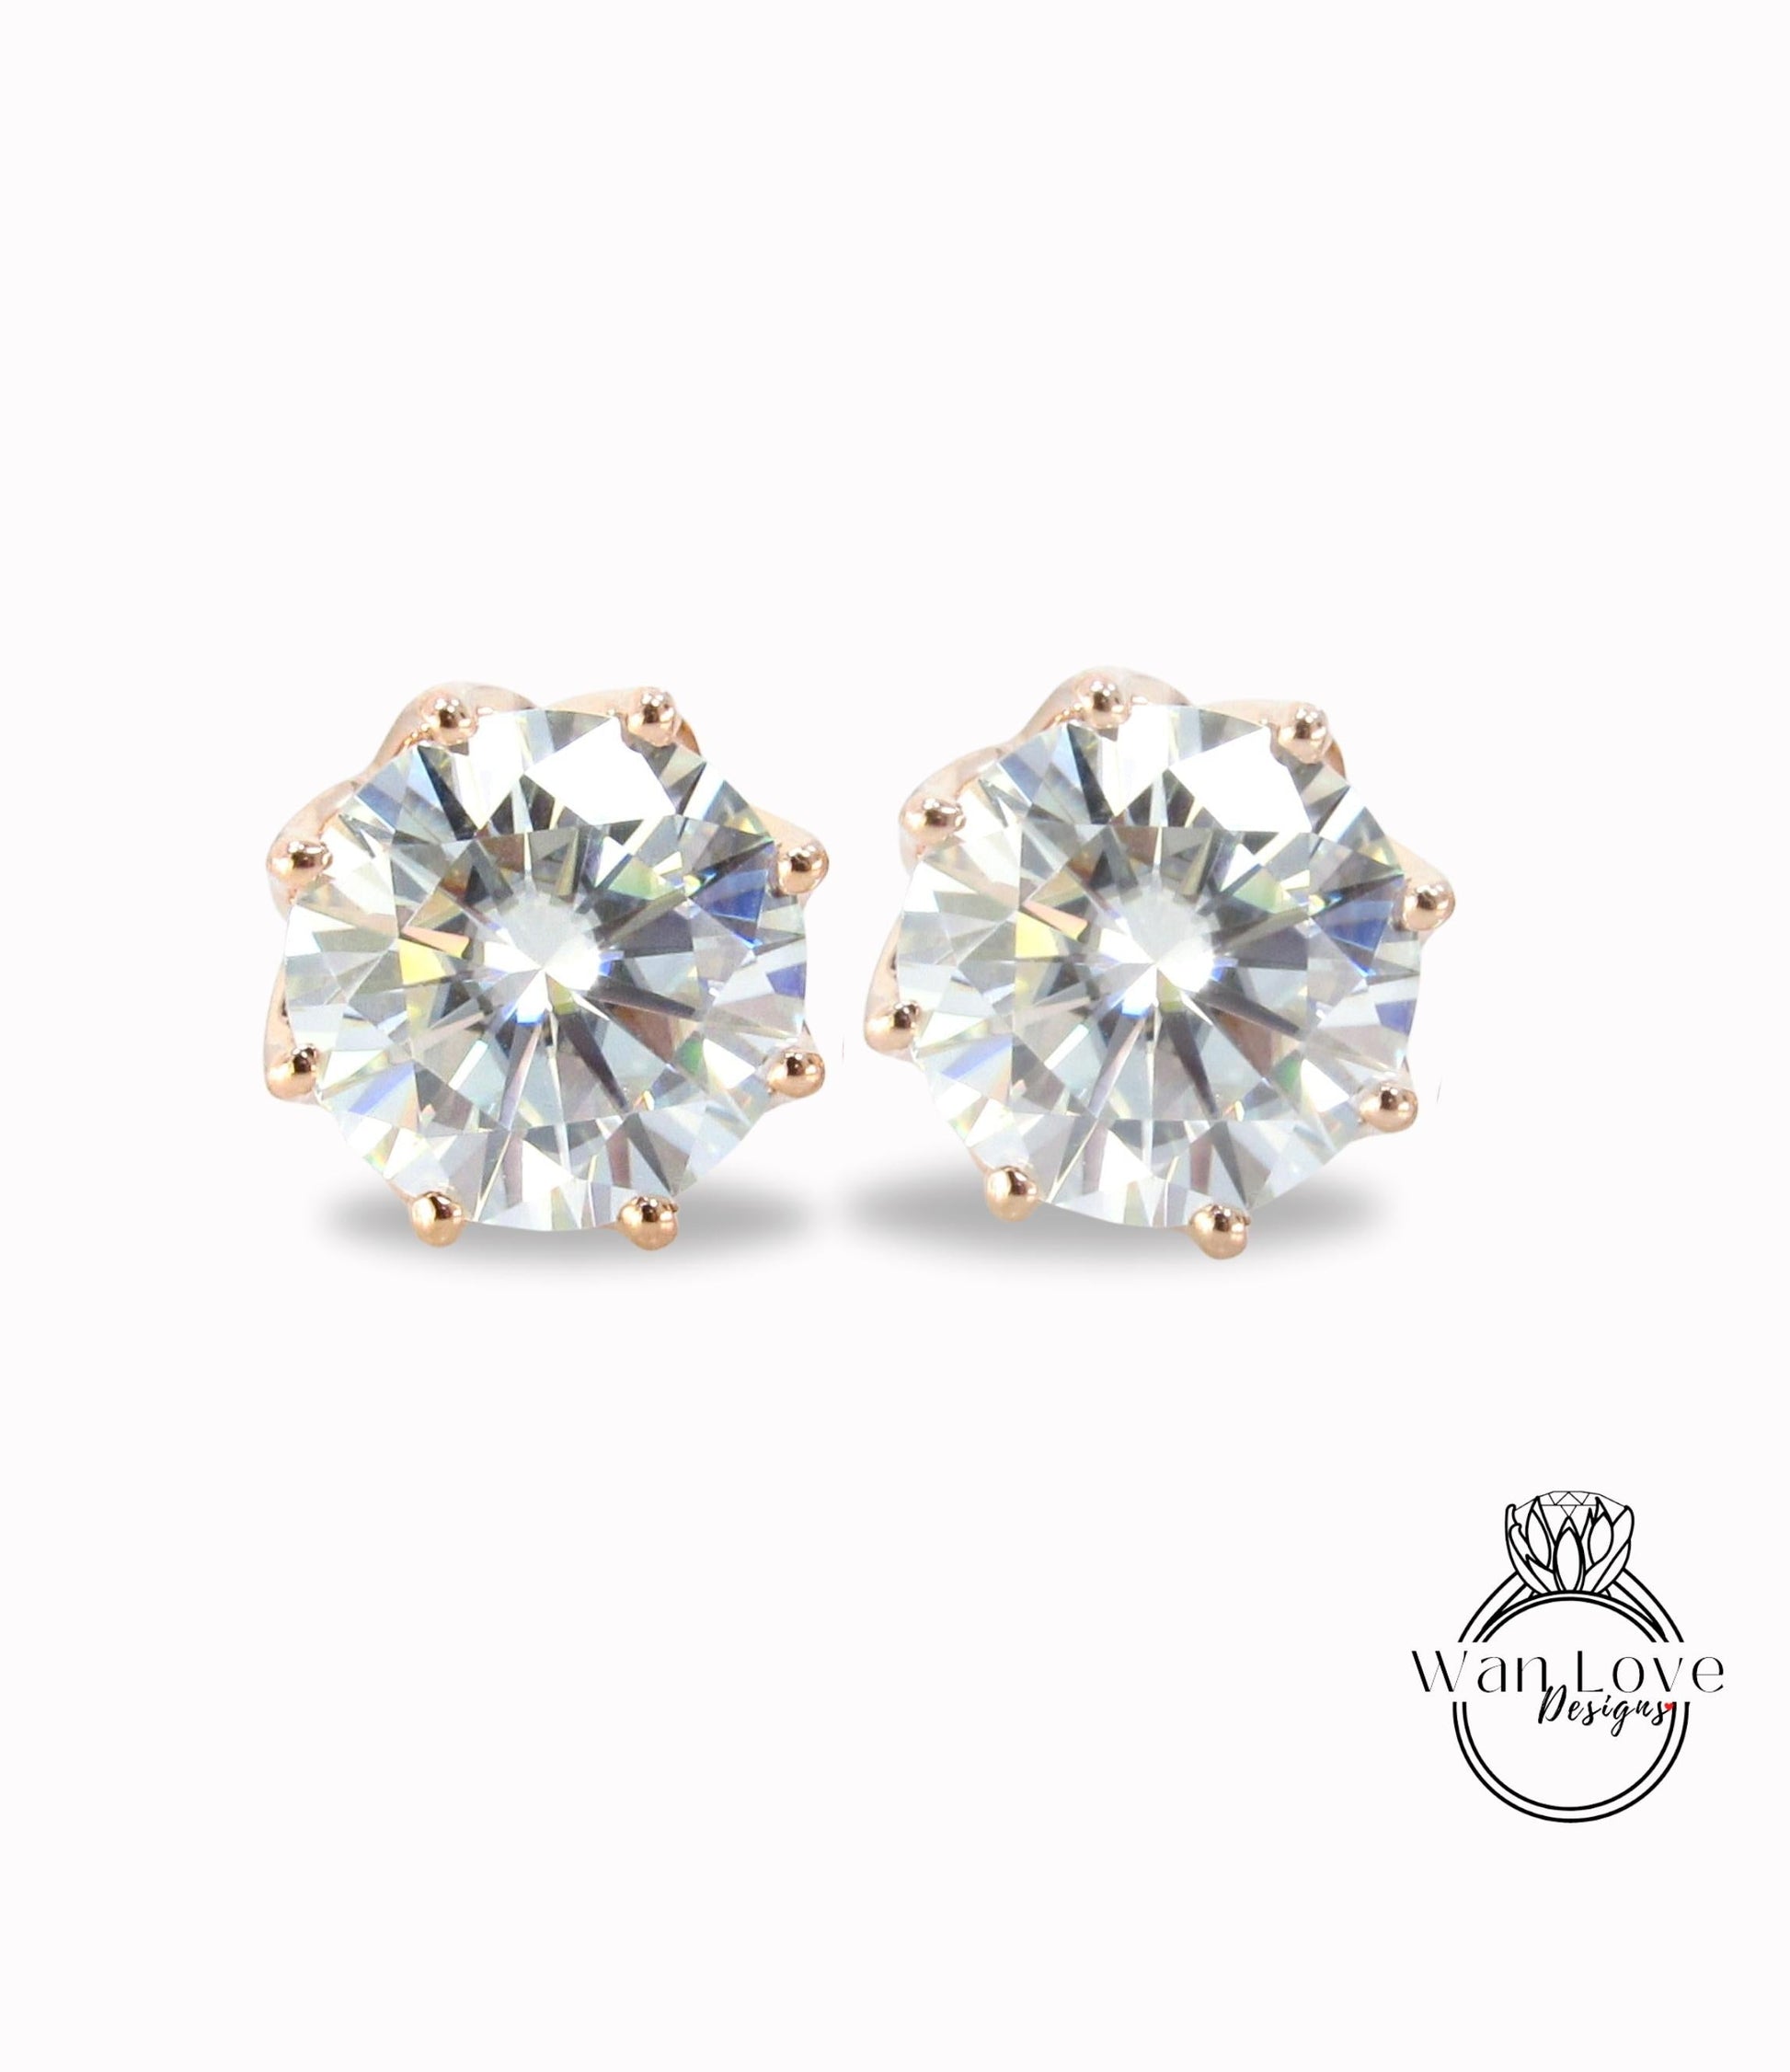 Moissanite Earrings Round cut studs 8 Prongs Screw Back, 1ct each, 2ct total weight, 6.5mm,Custom, White Gold,Anniversary Gift-Ready to Ship Wan Love Designs